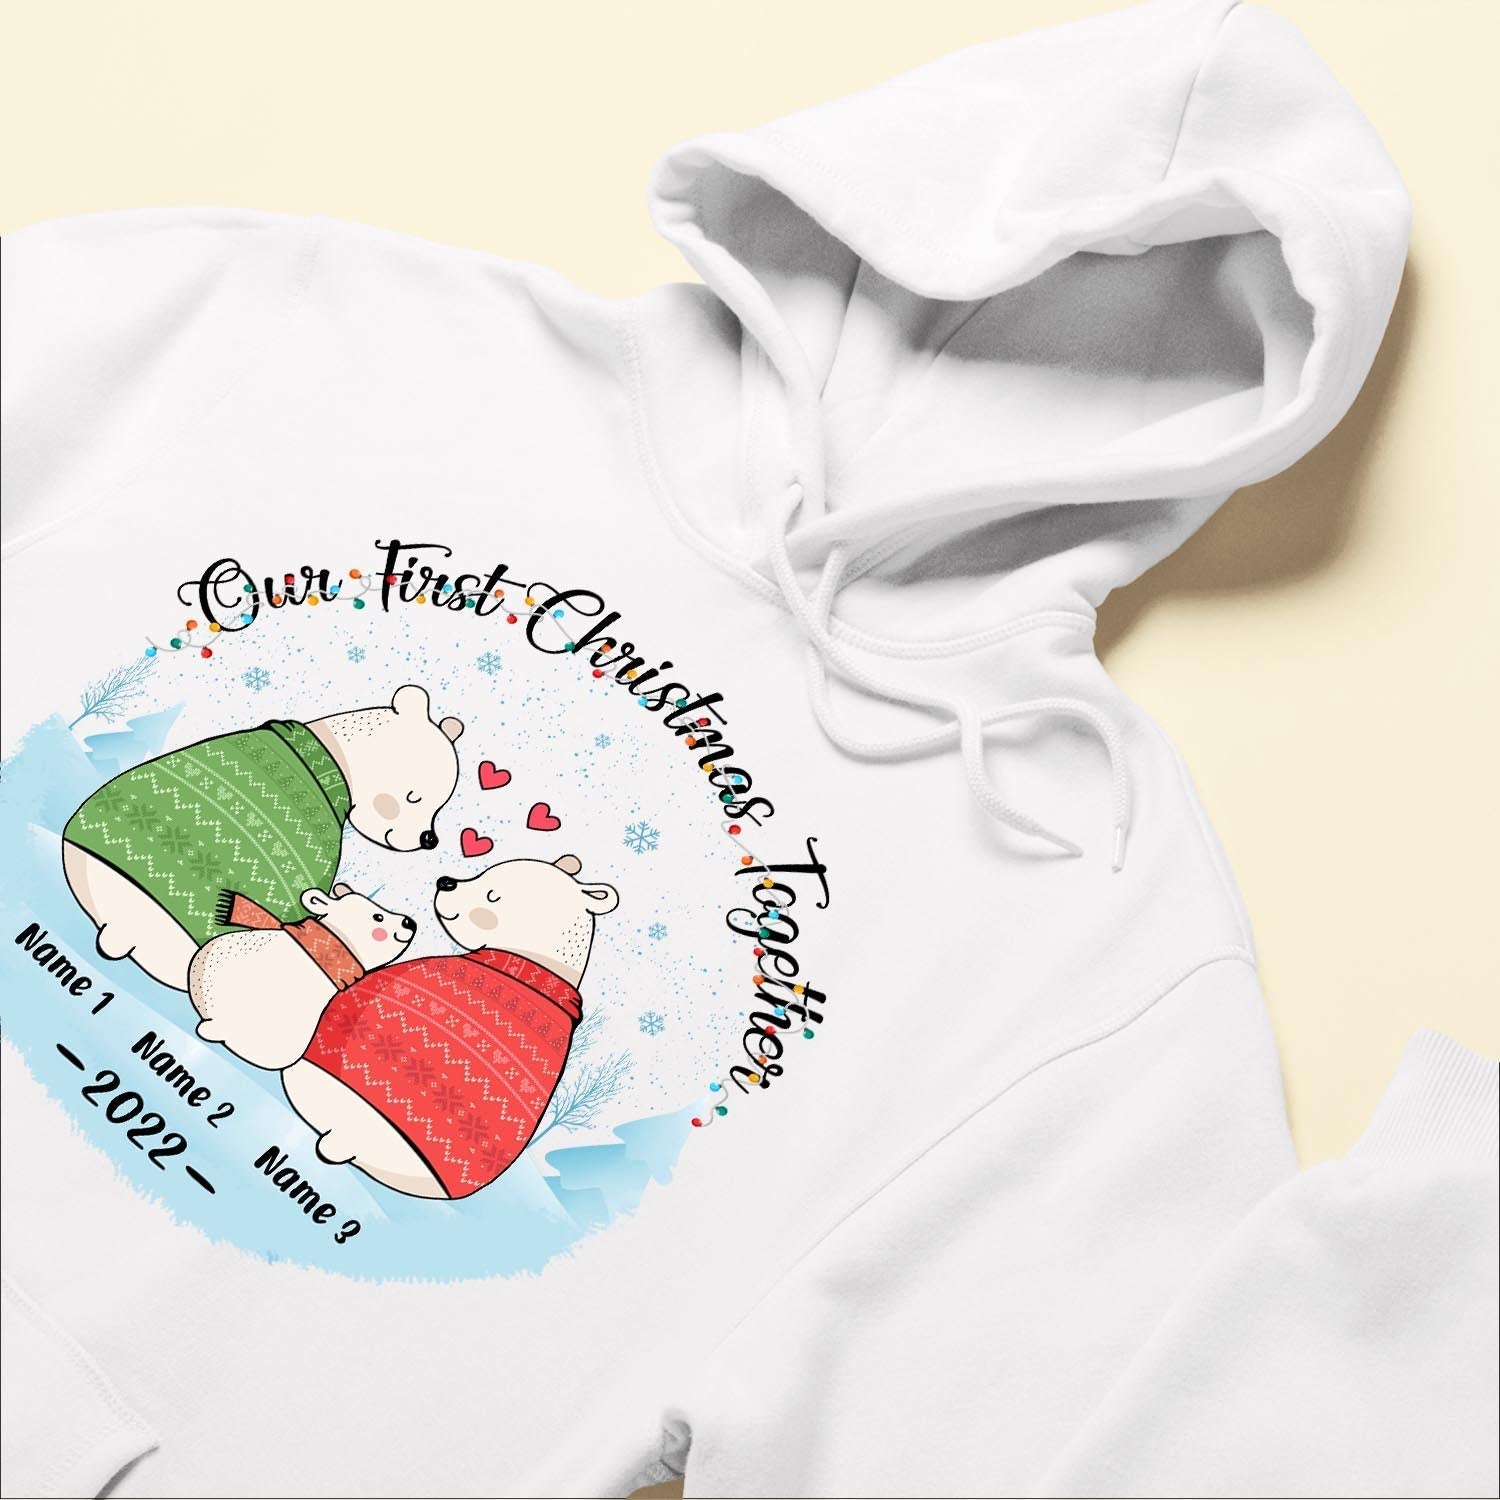 Our First Christmas Together - Personalized Shirt - Christmas Gift For Parents